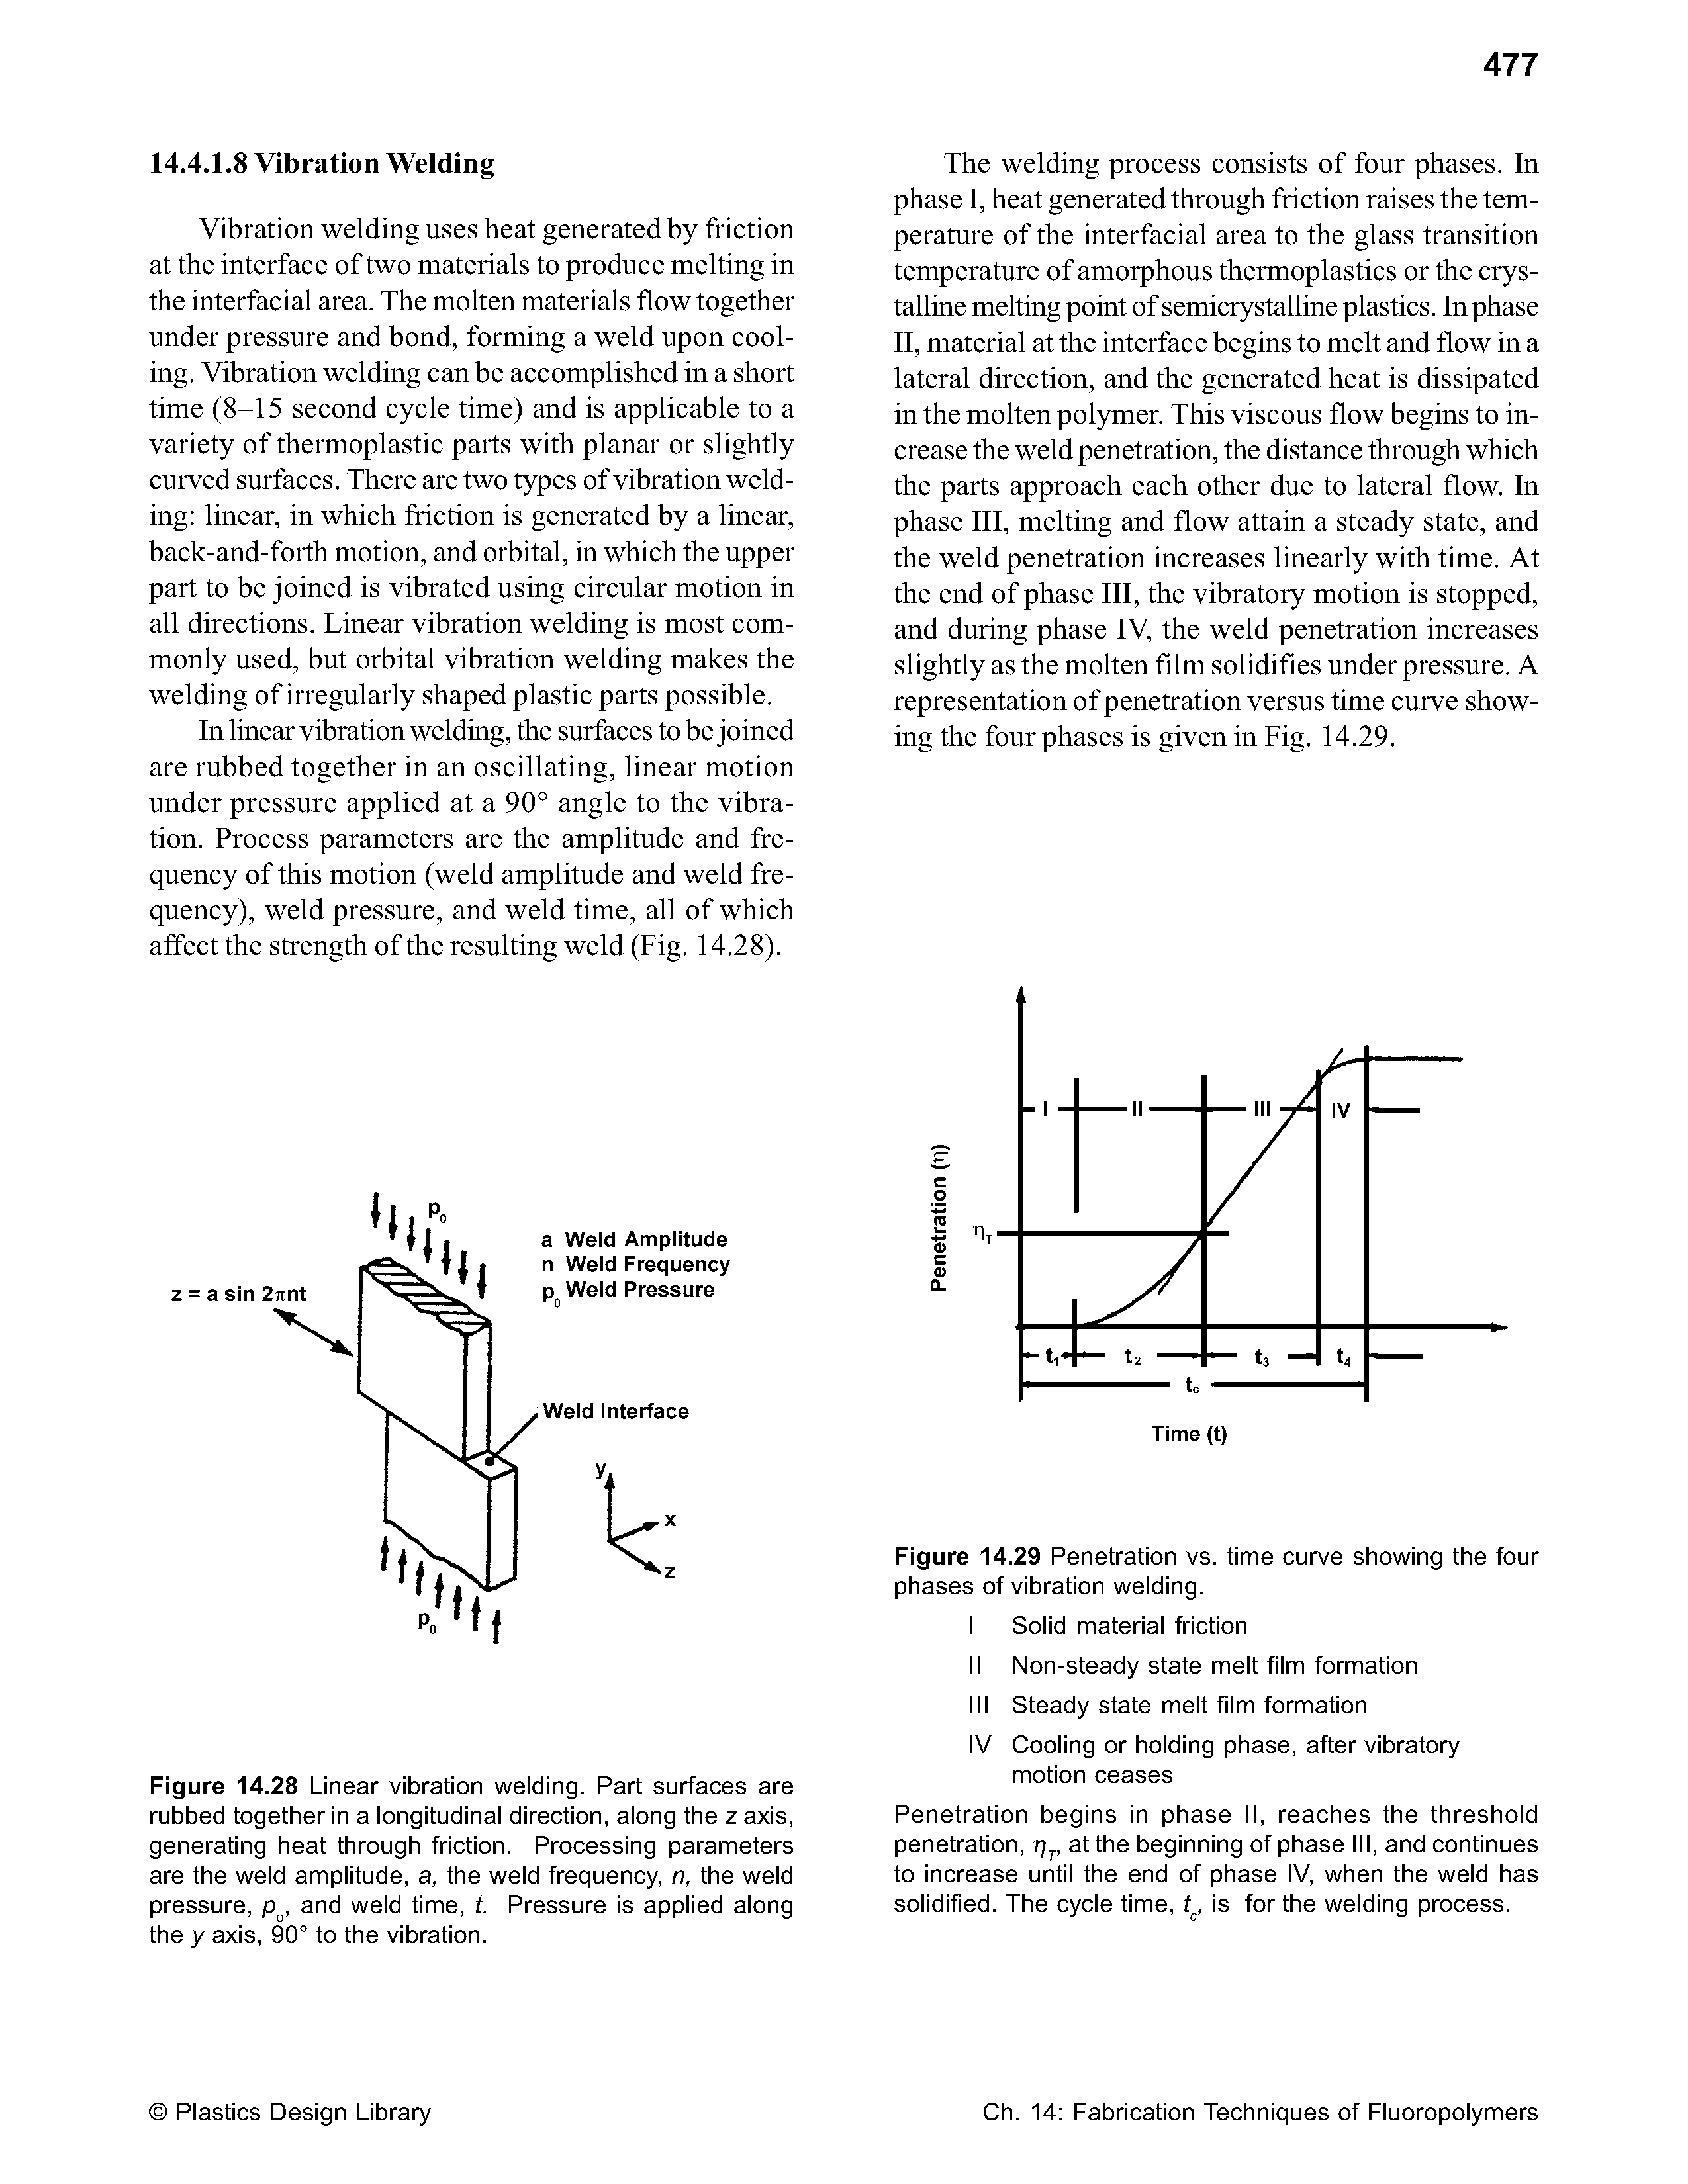 Figure 14.28 Linear vibration welding. Part surfaces are rubbed together in a longitudinal direction, along the z axis, generating heat through friction. Processing parameters are the weld amplitude, a, the weld frequency, n, the weld pressure, p, and weld time, f. Pressure is applied along the y axis, 90° to the vibration.